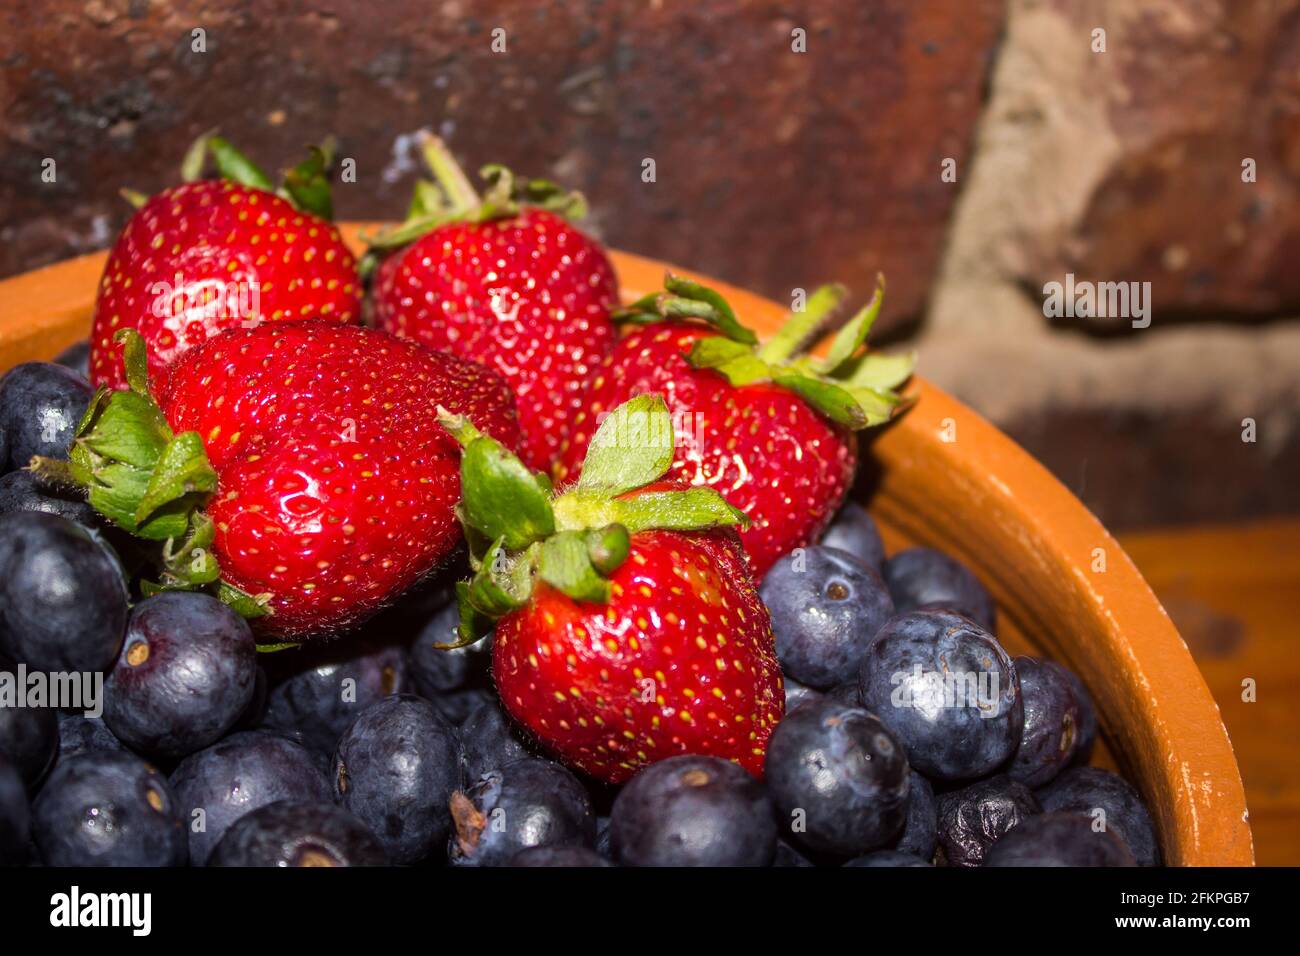 A rustic Bowl with a few bright red strawberries, on top of a large amount of indigo-colored blueberries Stock Photo